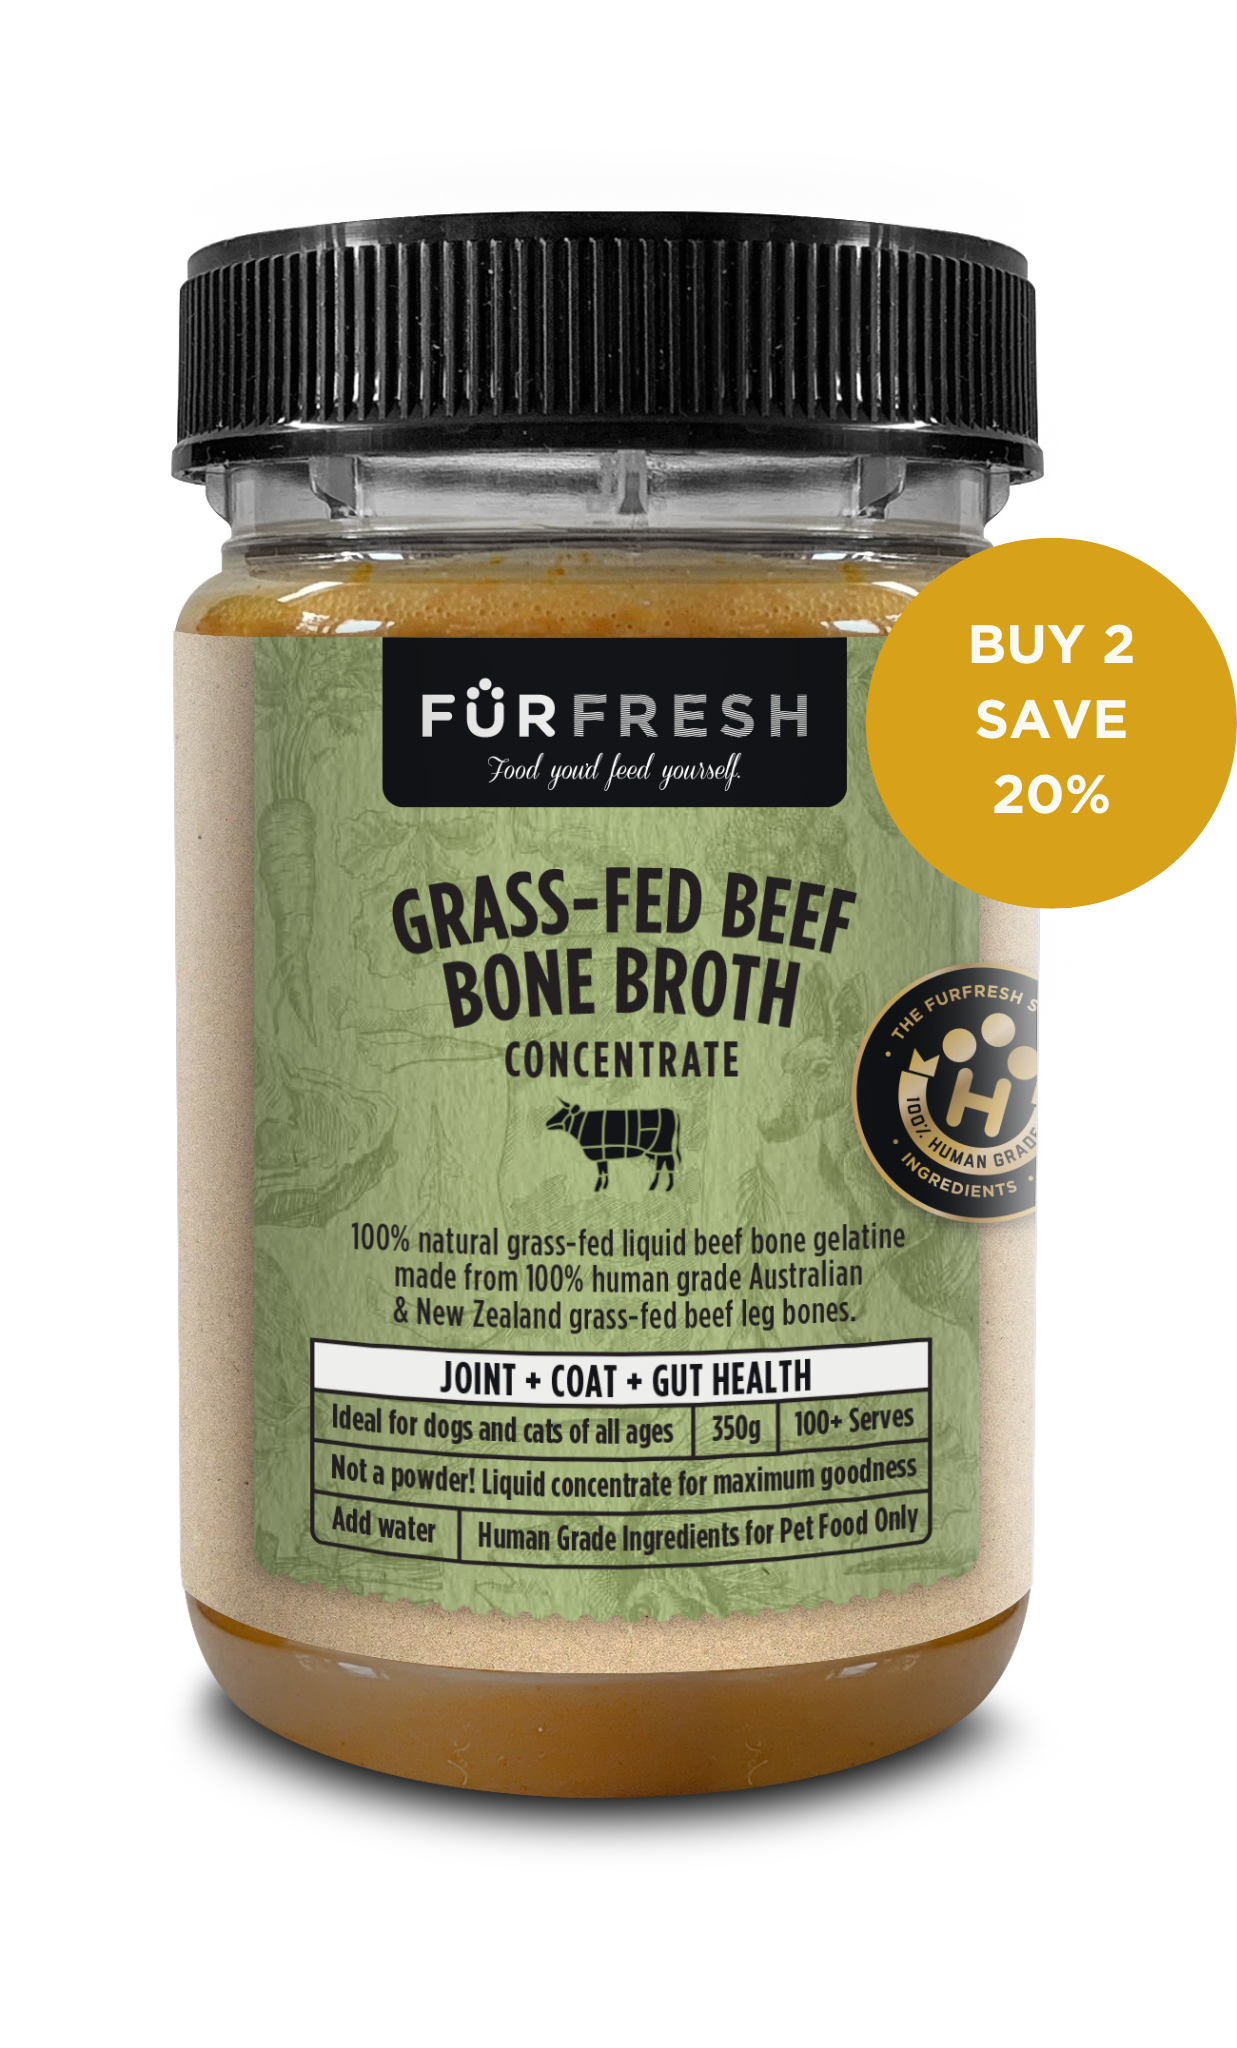 Grass-Fed Beef Bone Broth Concentrate